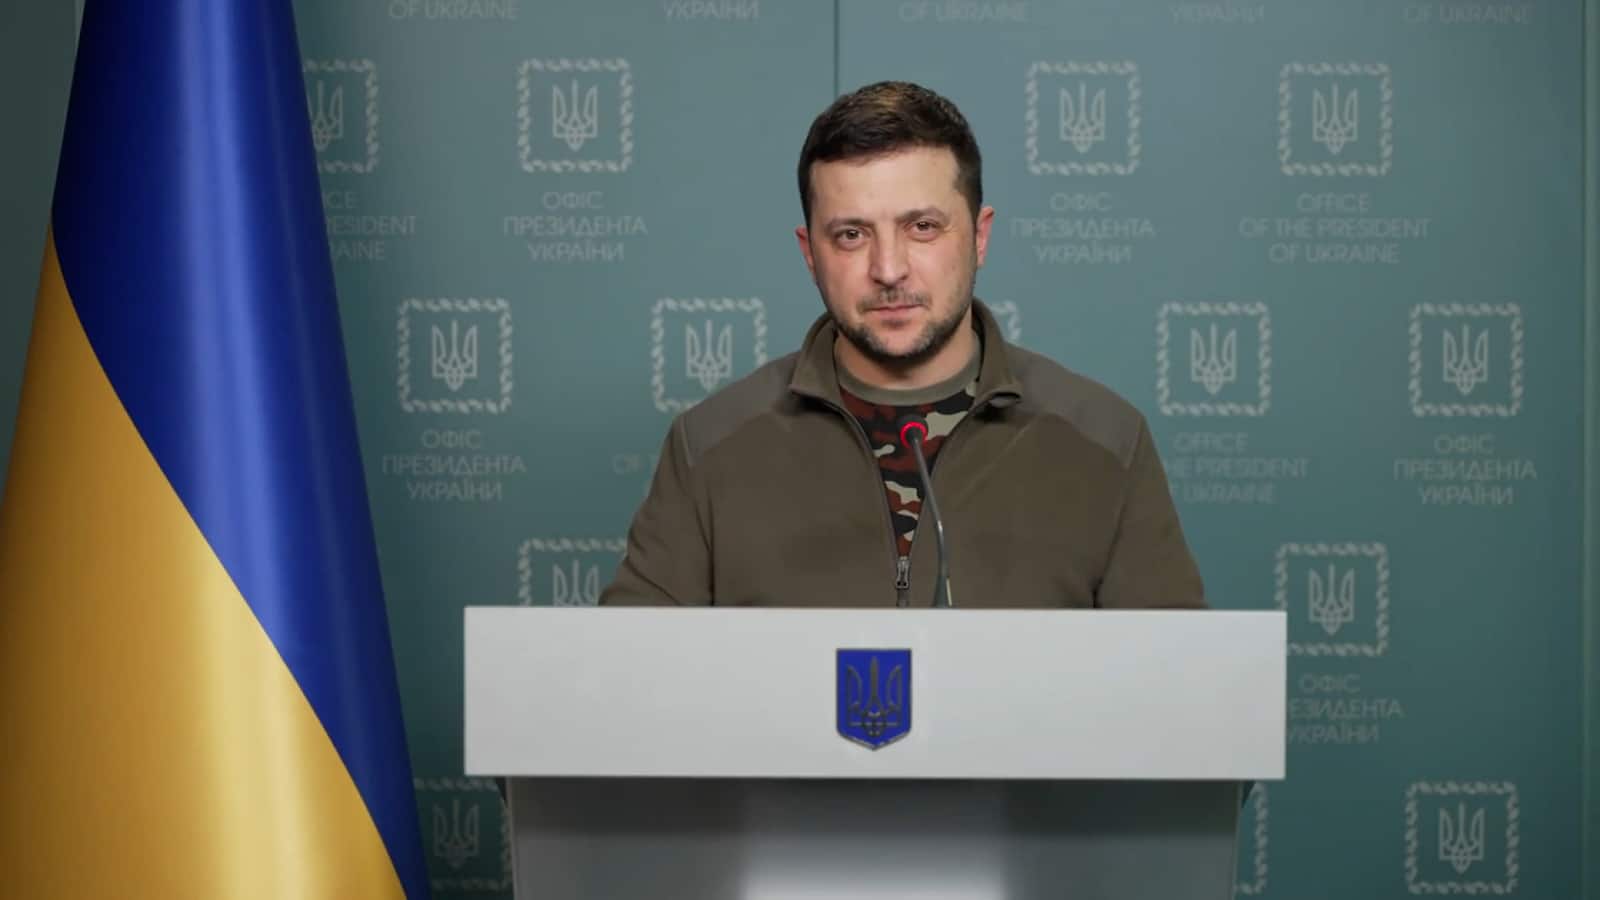 Zelensky says ‘we will not forgive’ after Russians kill fleeing civilians